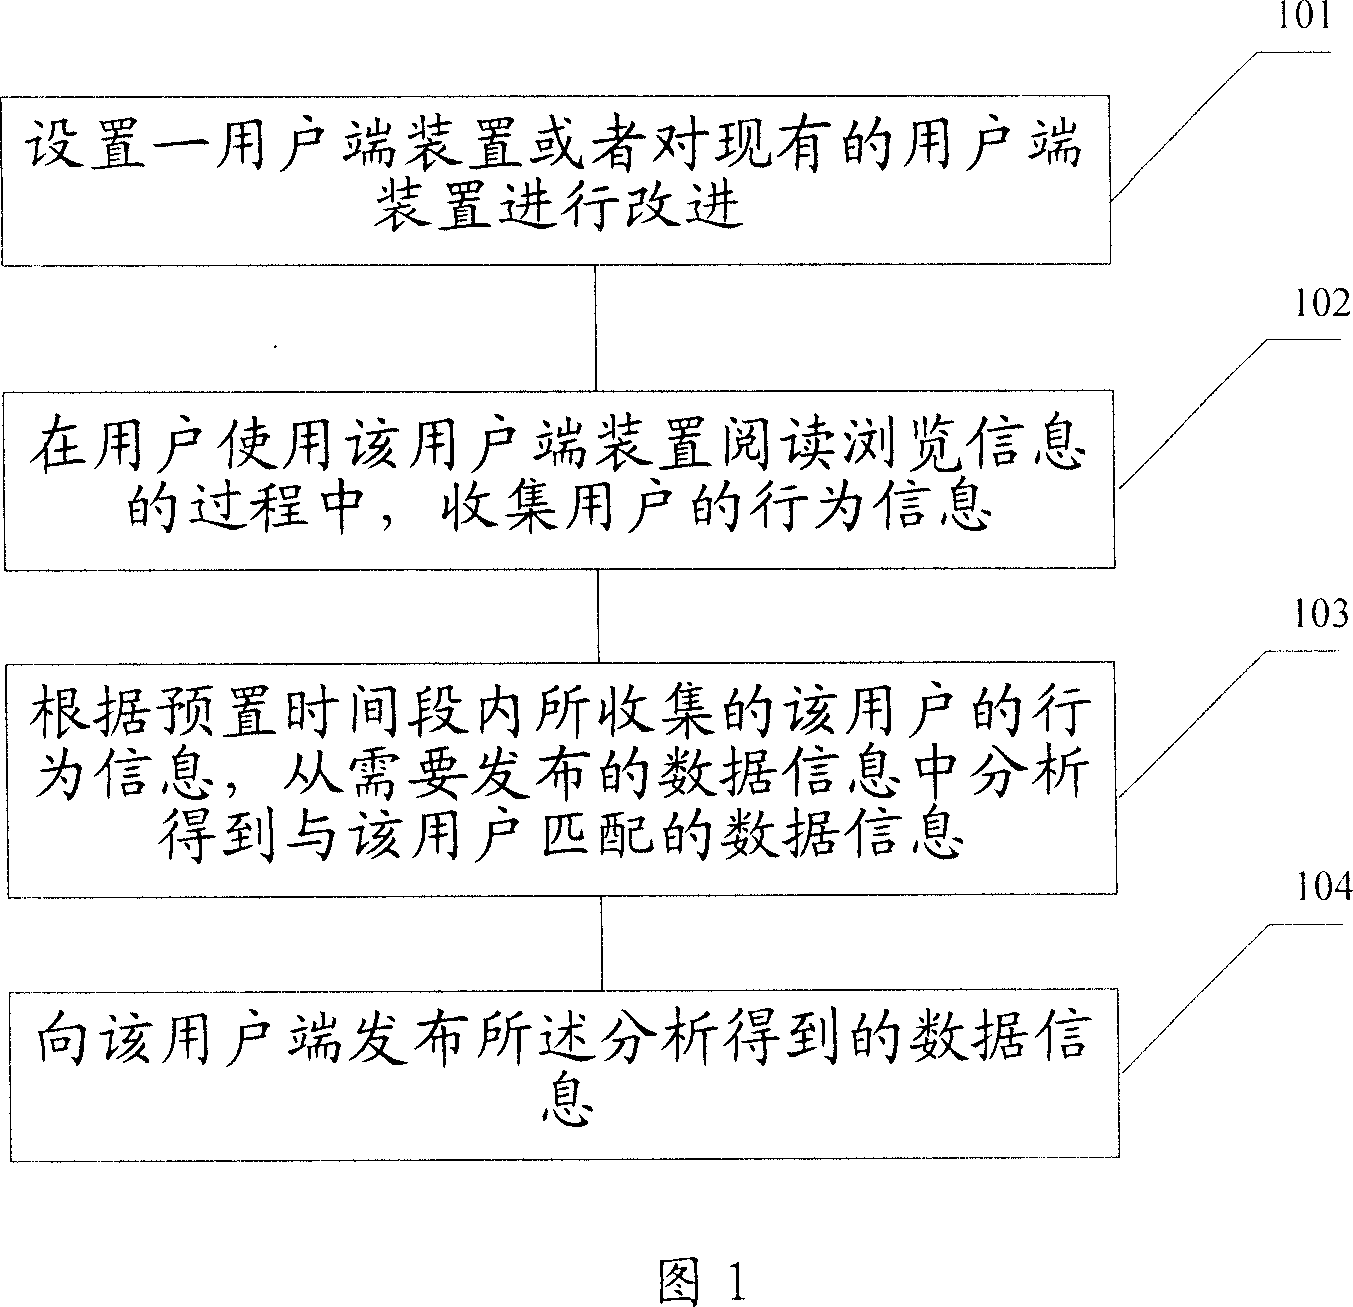 Method and system for accurately publishing the data information